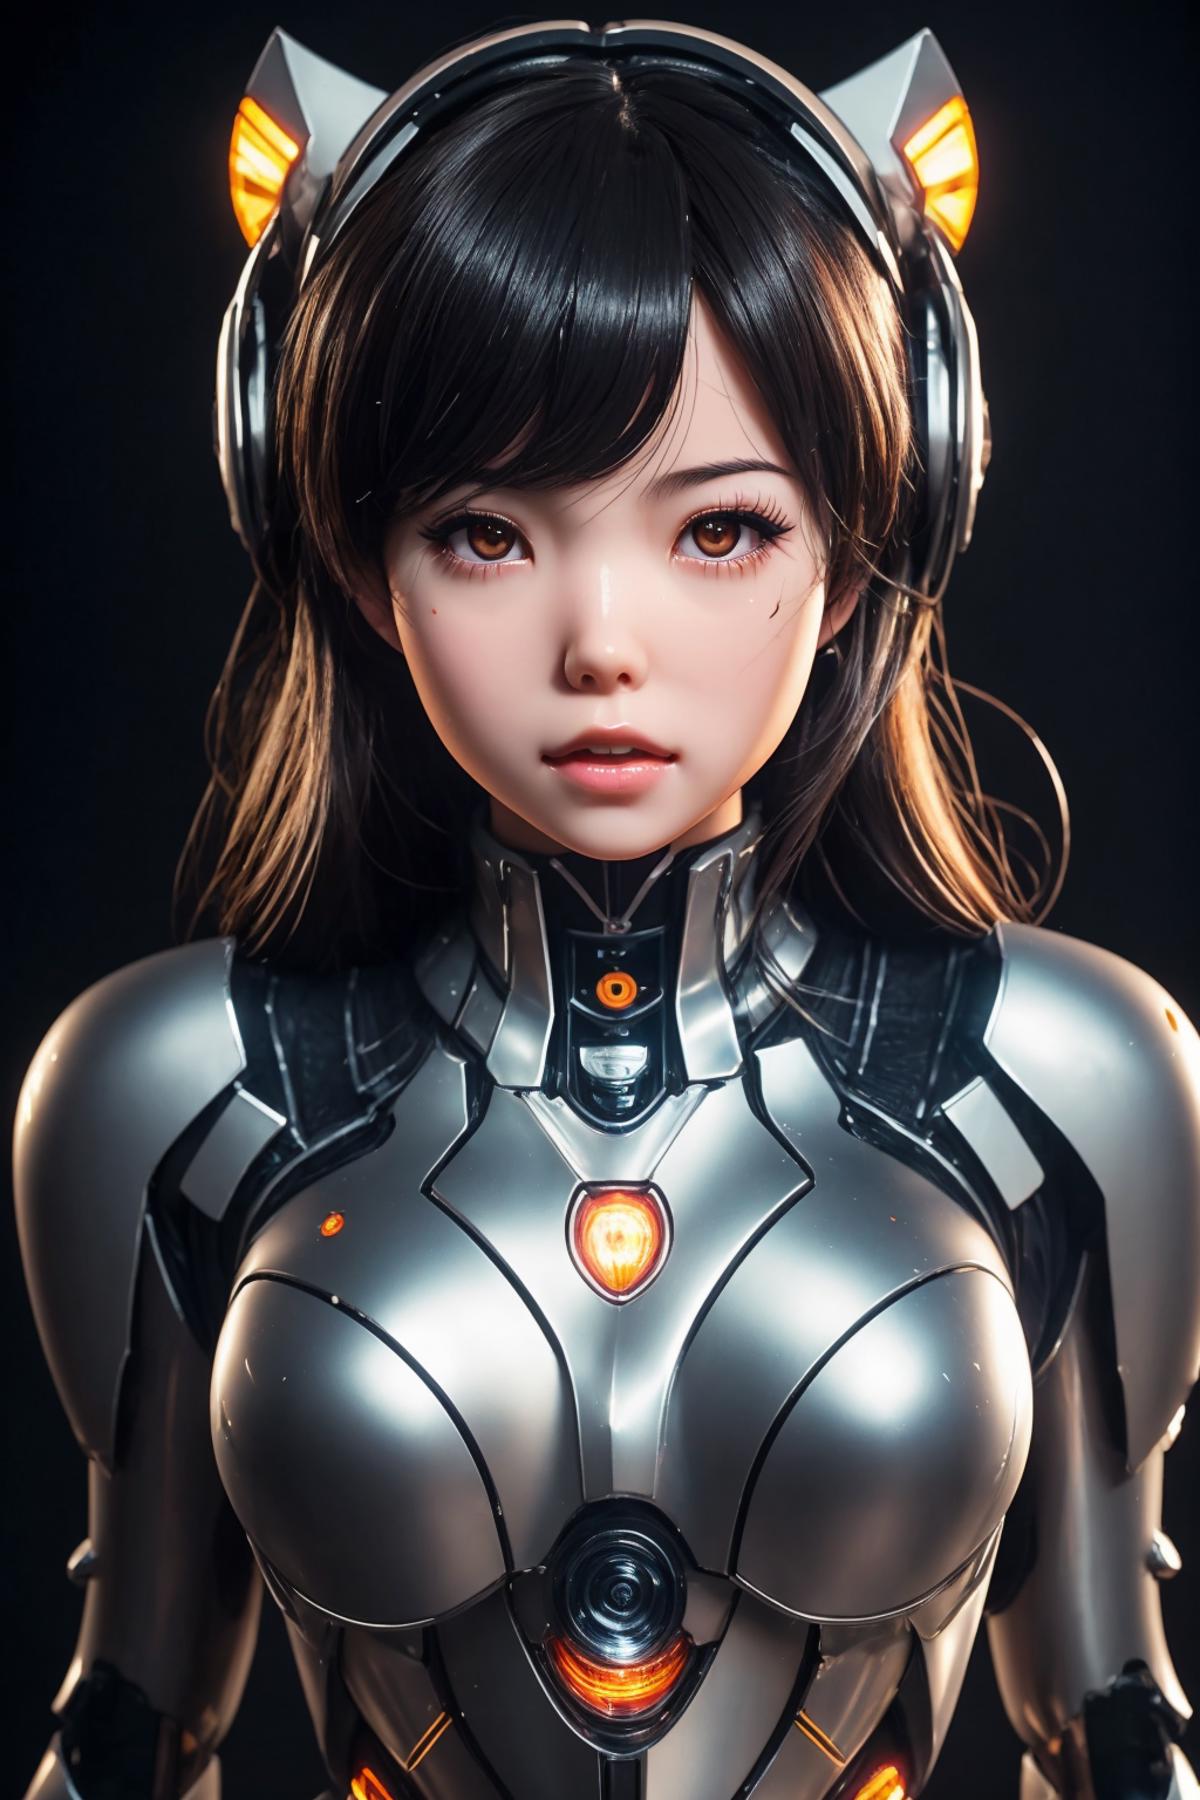 AI model image by AIdollagency